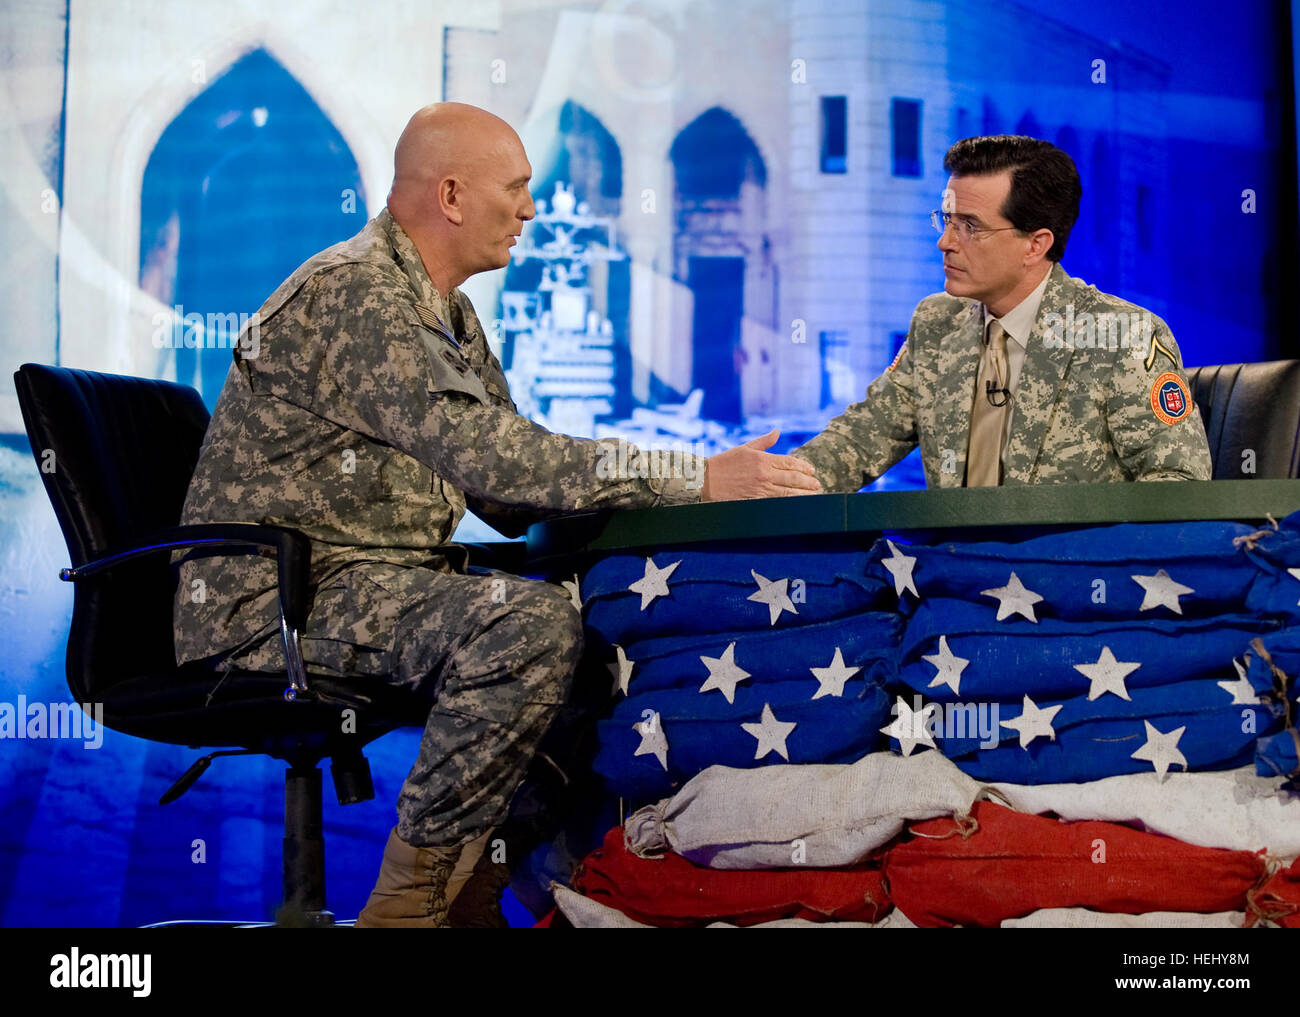 Stephen Colbert interviews special guest Gen.l Ray Odierno, Commanding General of the Multi-National Force-Iraq during Monday night's episode of 'The Colbert Report' Flickr - The U.S. Army - Stephen Colbert in Iraq (2) Stock Photo